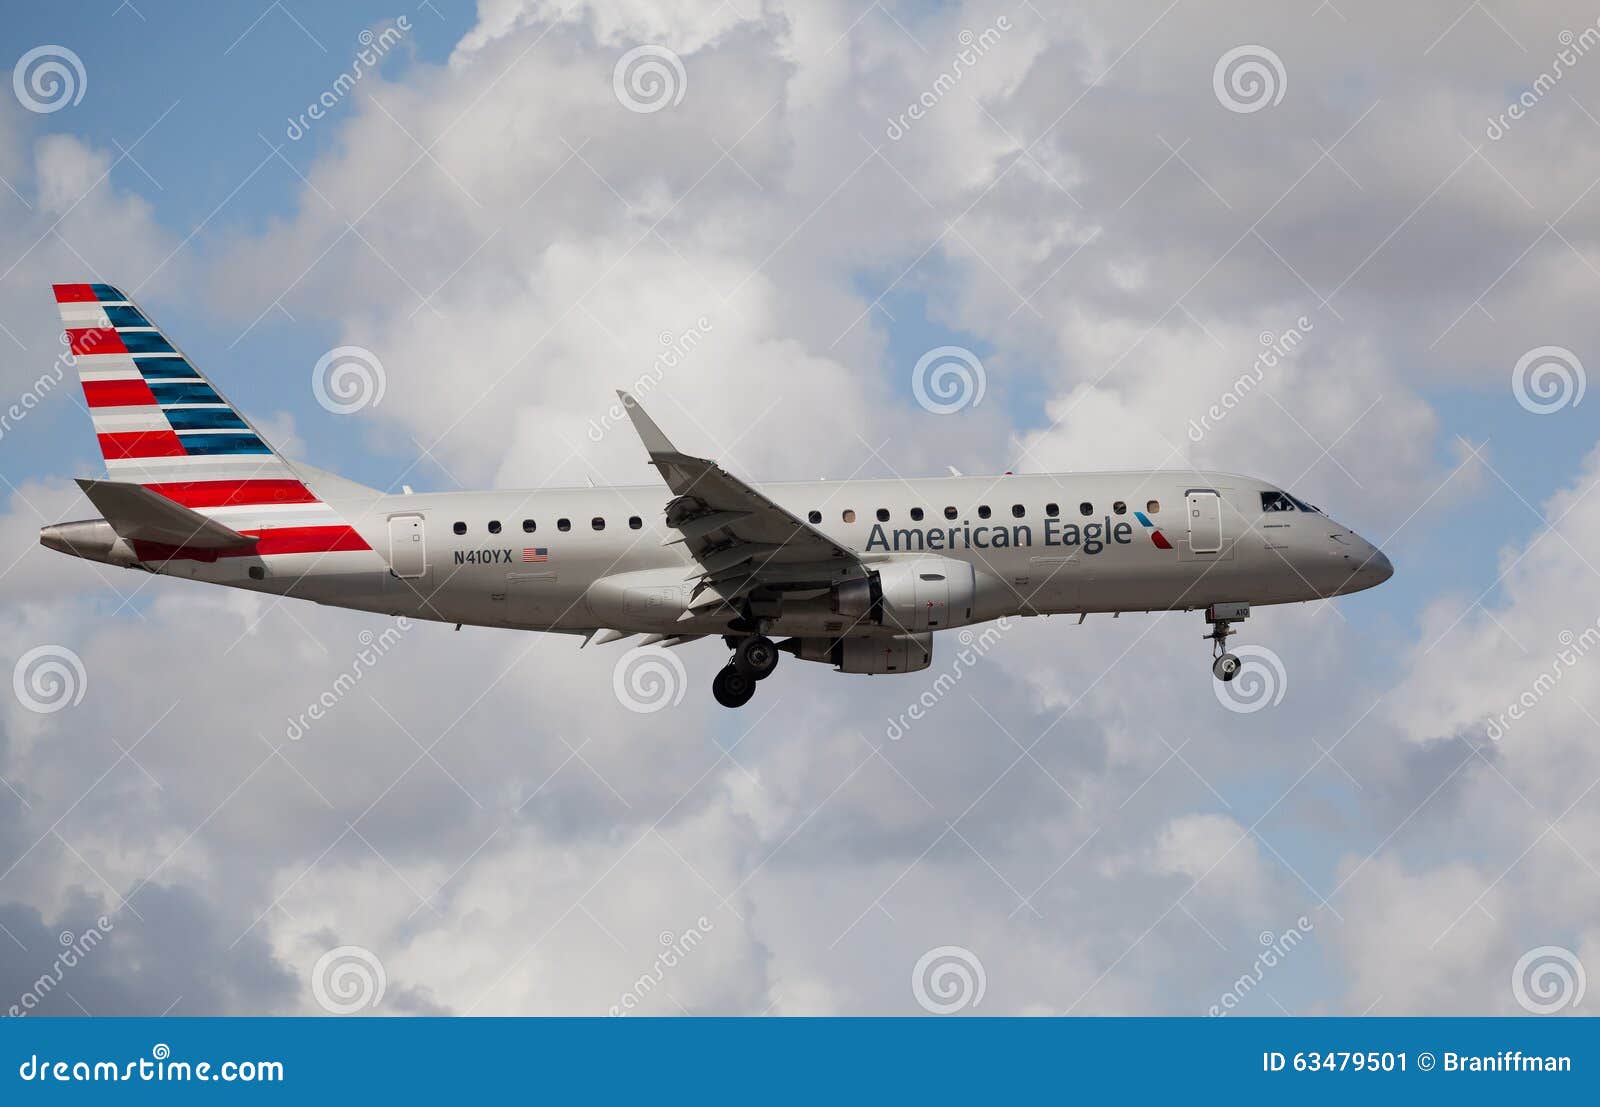 Embraer 175 Of American Eagle Airlines Landing At Miami Editorial Photo Image Of Passenger Jetliner 63479501